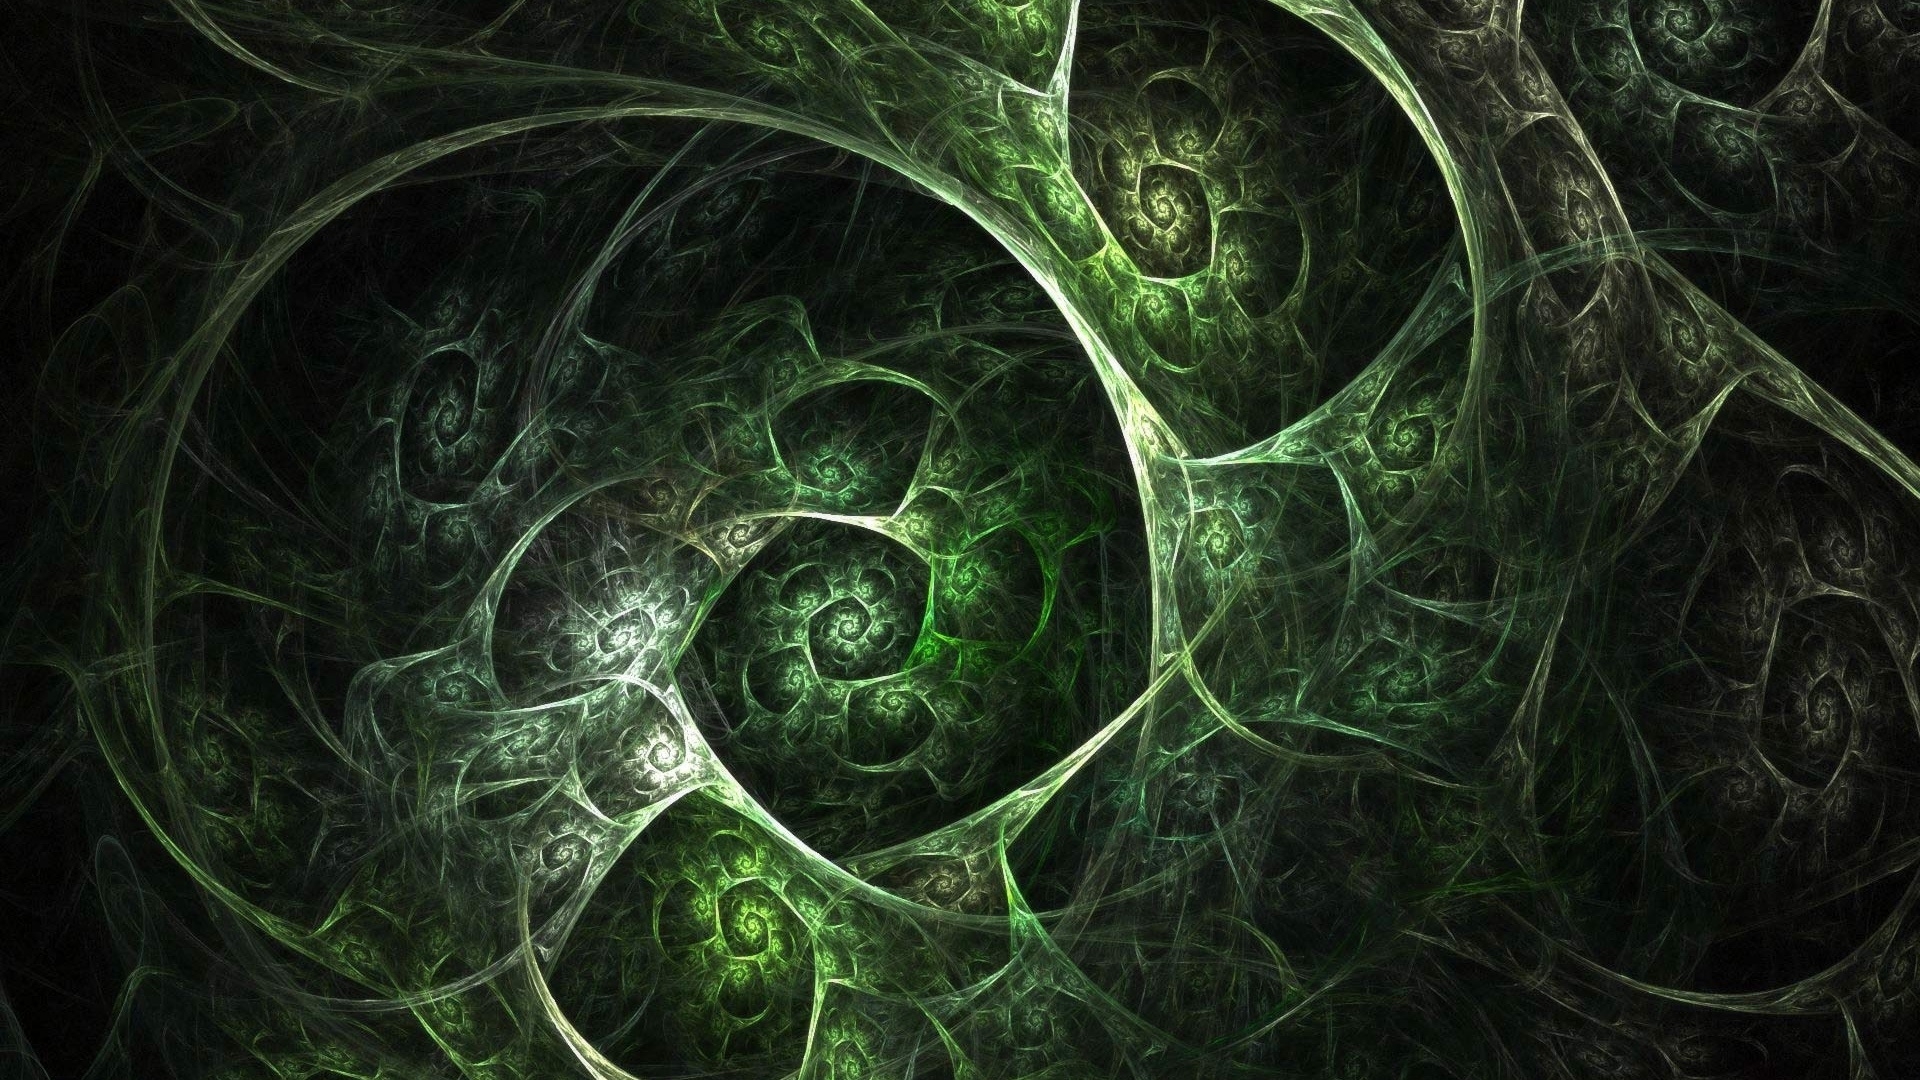 Beautiful fractal for 1920 x 1080 HDTV 1080p resolution